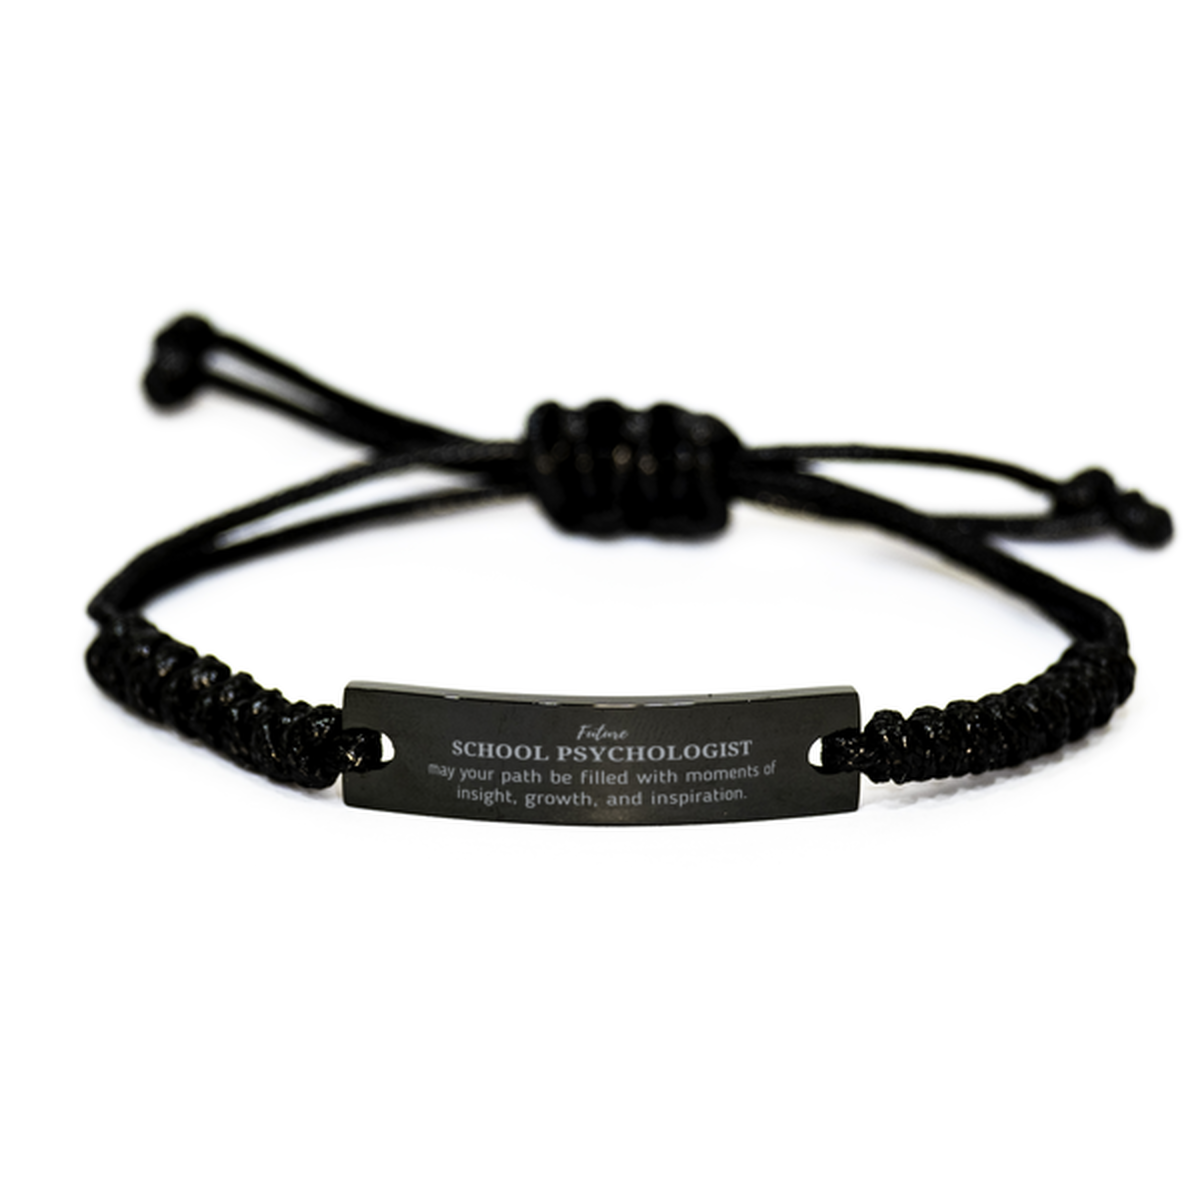 Future School Psychologist Gifts, May your path be filled with moments of insight, Graduation Gifts for New School Psychologist, Christmas Unique Black Rope Bracelet For Men, Women, Friends